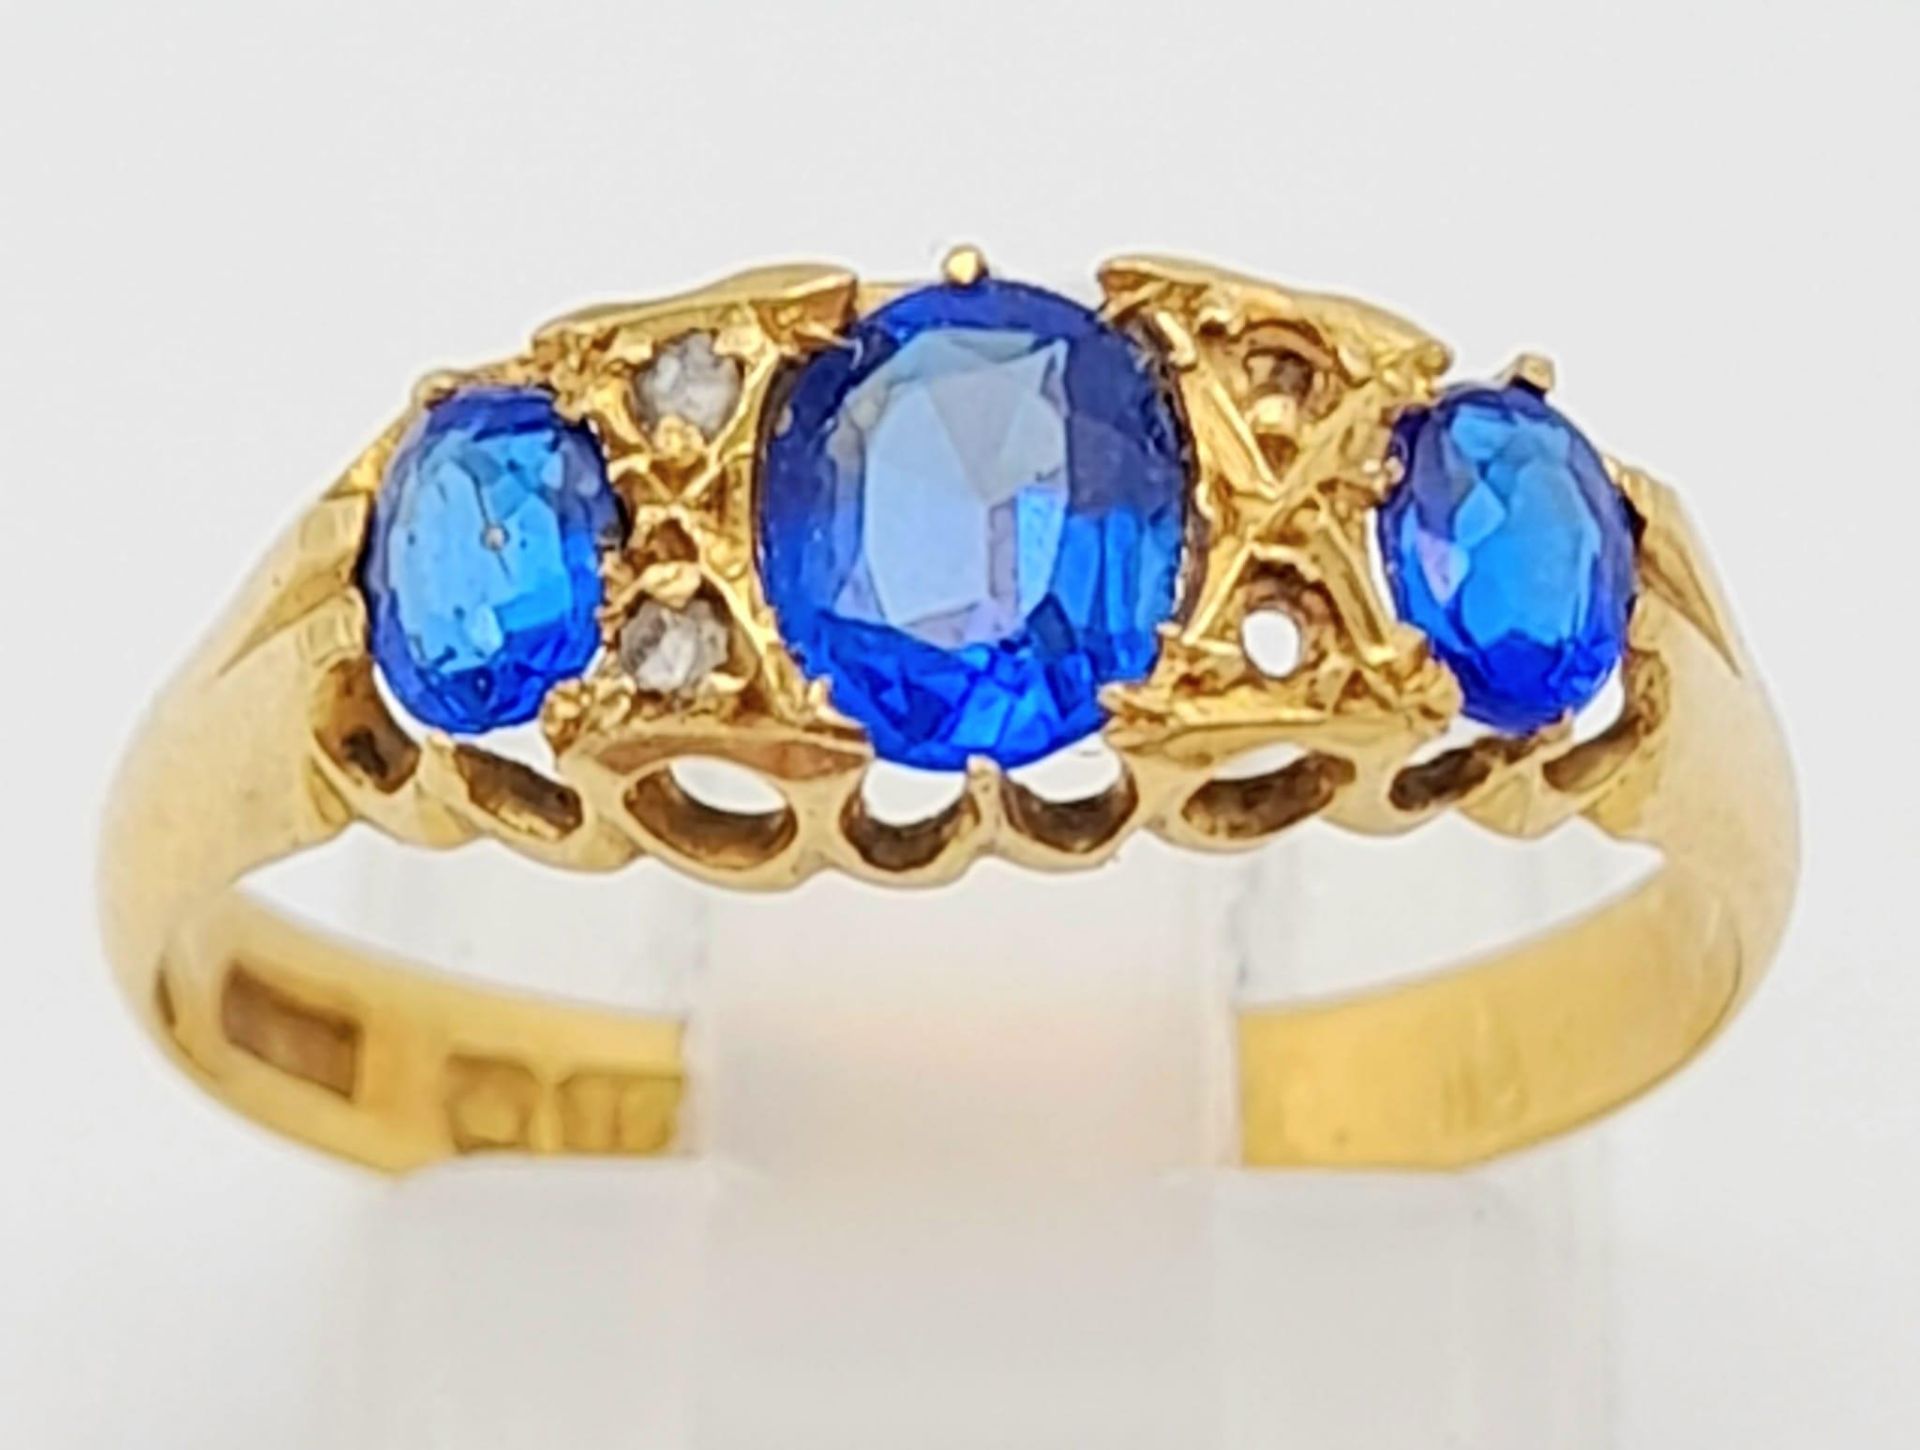 A Gorgeous Antique (1803) Georgian 18K Sapphire Ring. Three Royal blue oval sapphires. There are two